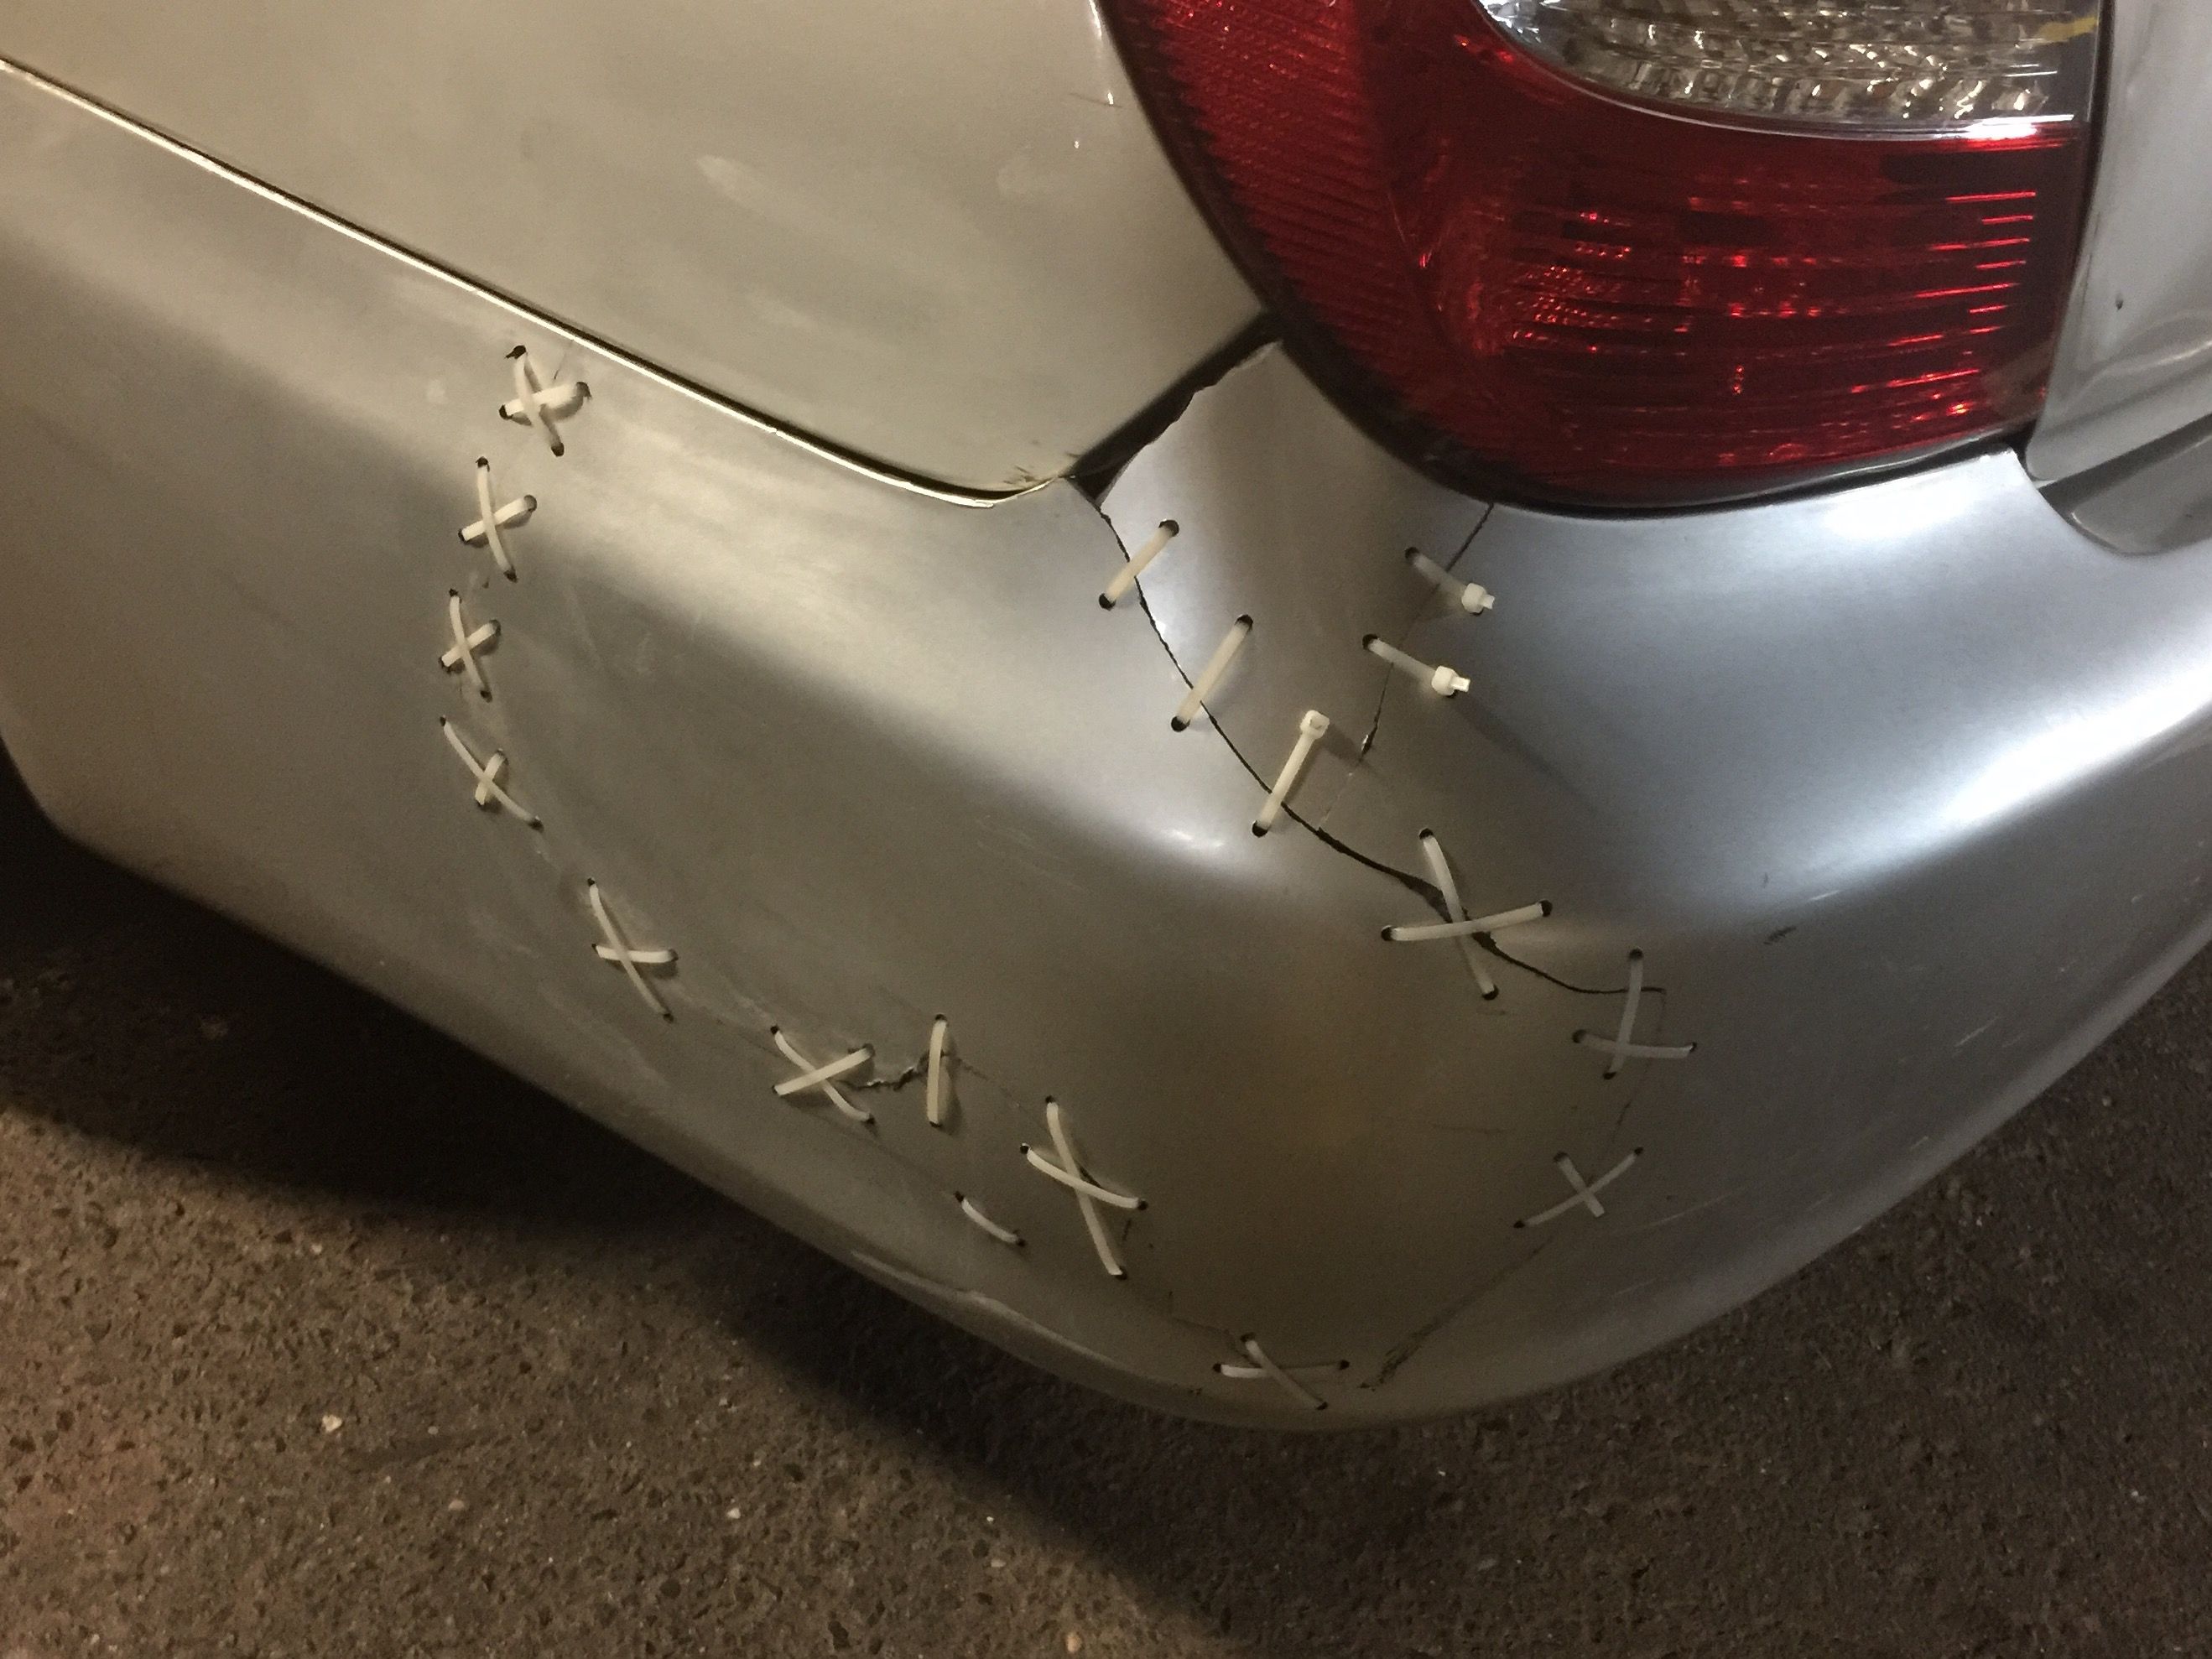 The way this bumper is stitched together with zip ties